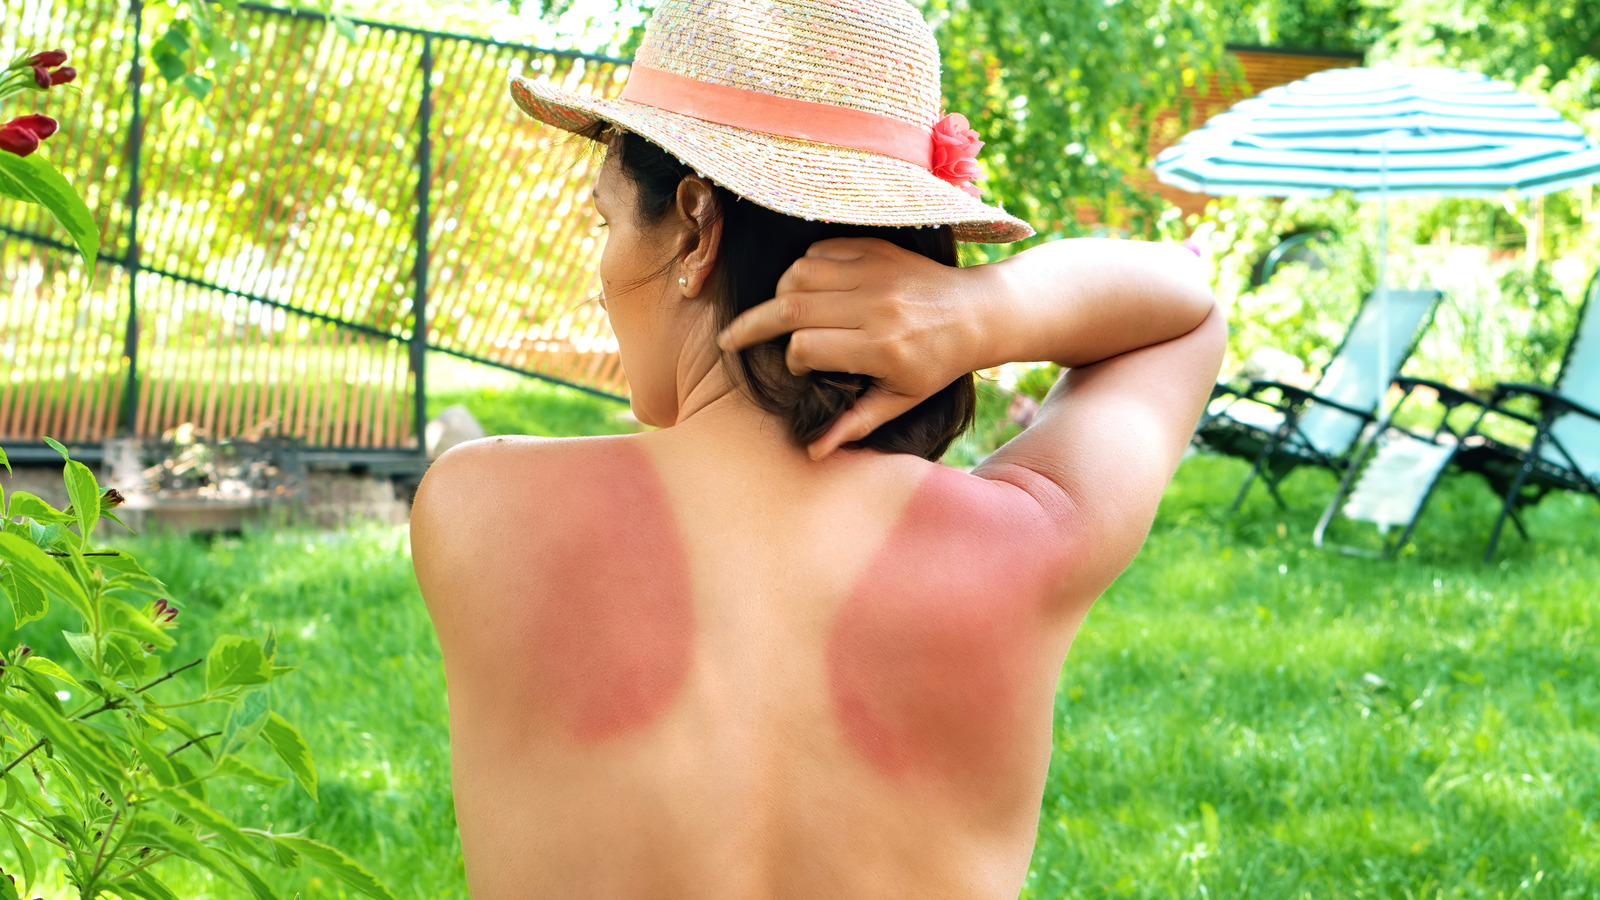 Should You Take Ibuprofen After Getting A Bad Sunburn? Here’s What We Know – Health Digest